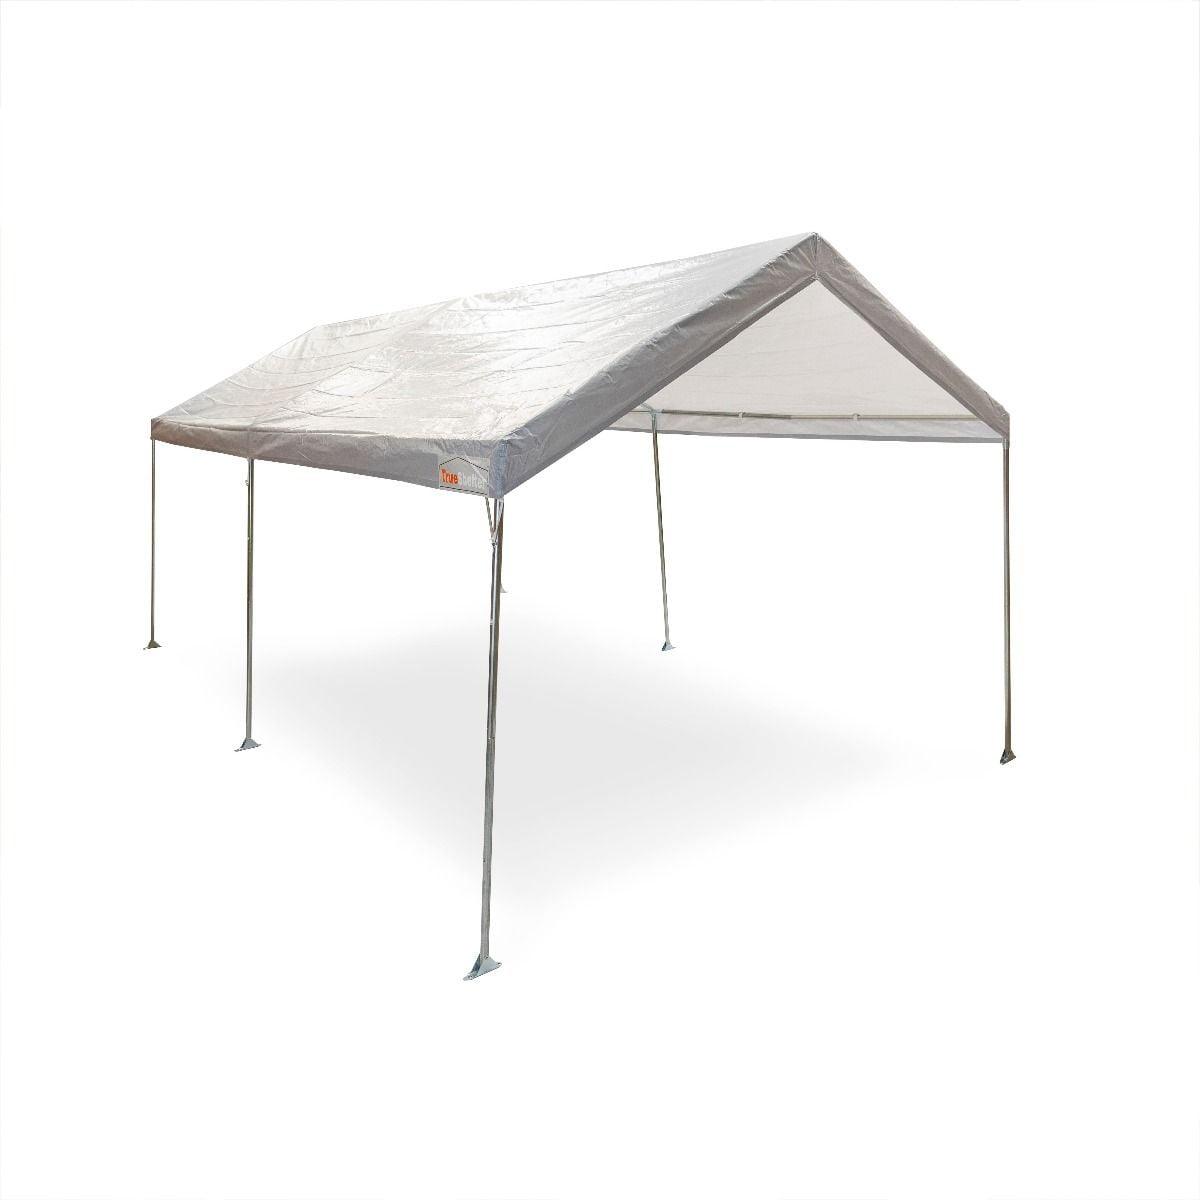 Picture of True Shelter TS1020E620 True Shelter 10 x 20 Foot All Weather Protection Sun Blocker Durable Car Canopy